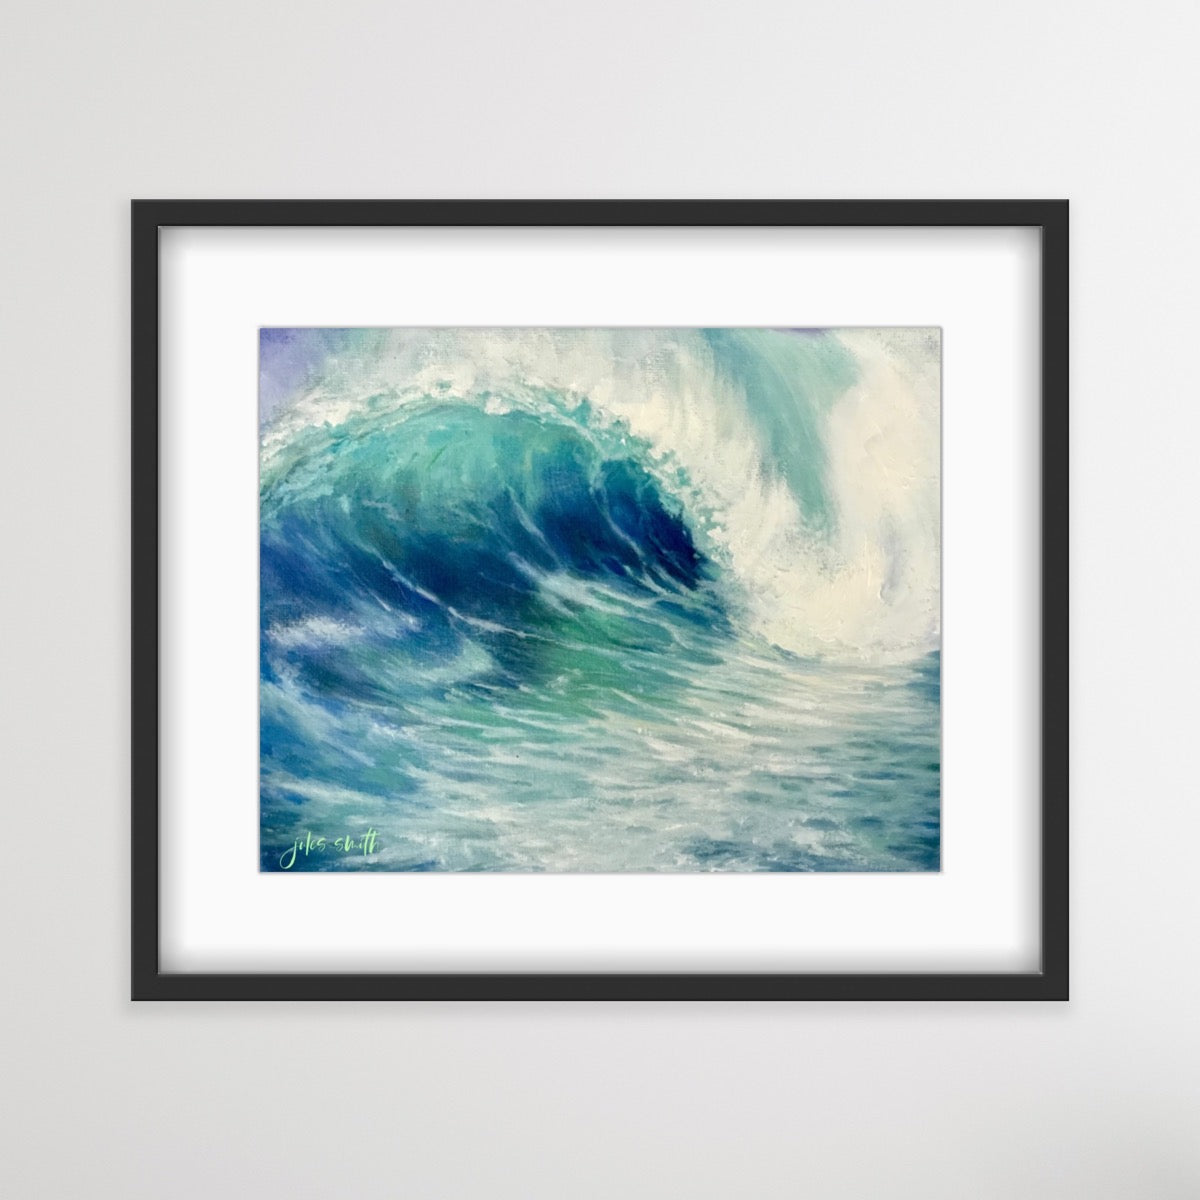 POWER OF THE SEA - Giclee Reproduction Print of Original Oil Painting